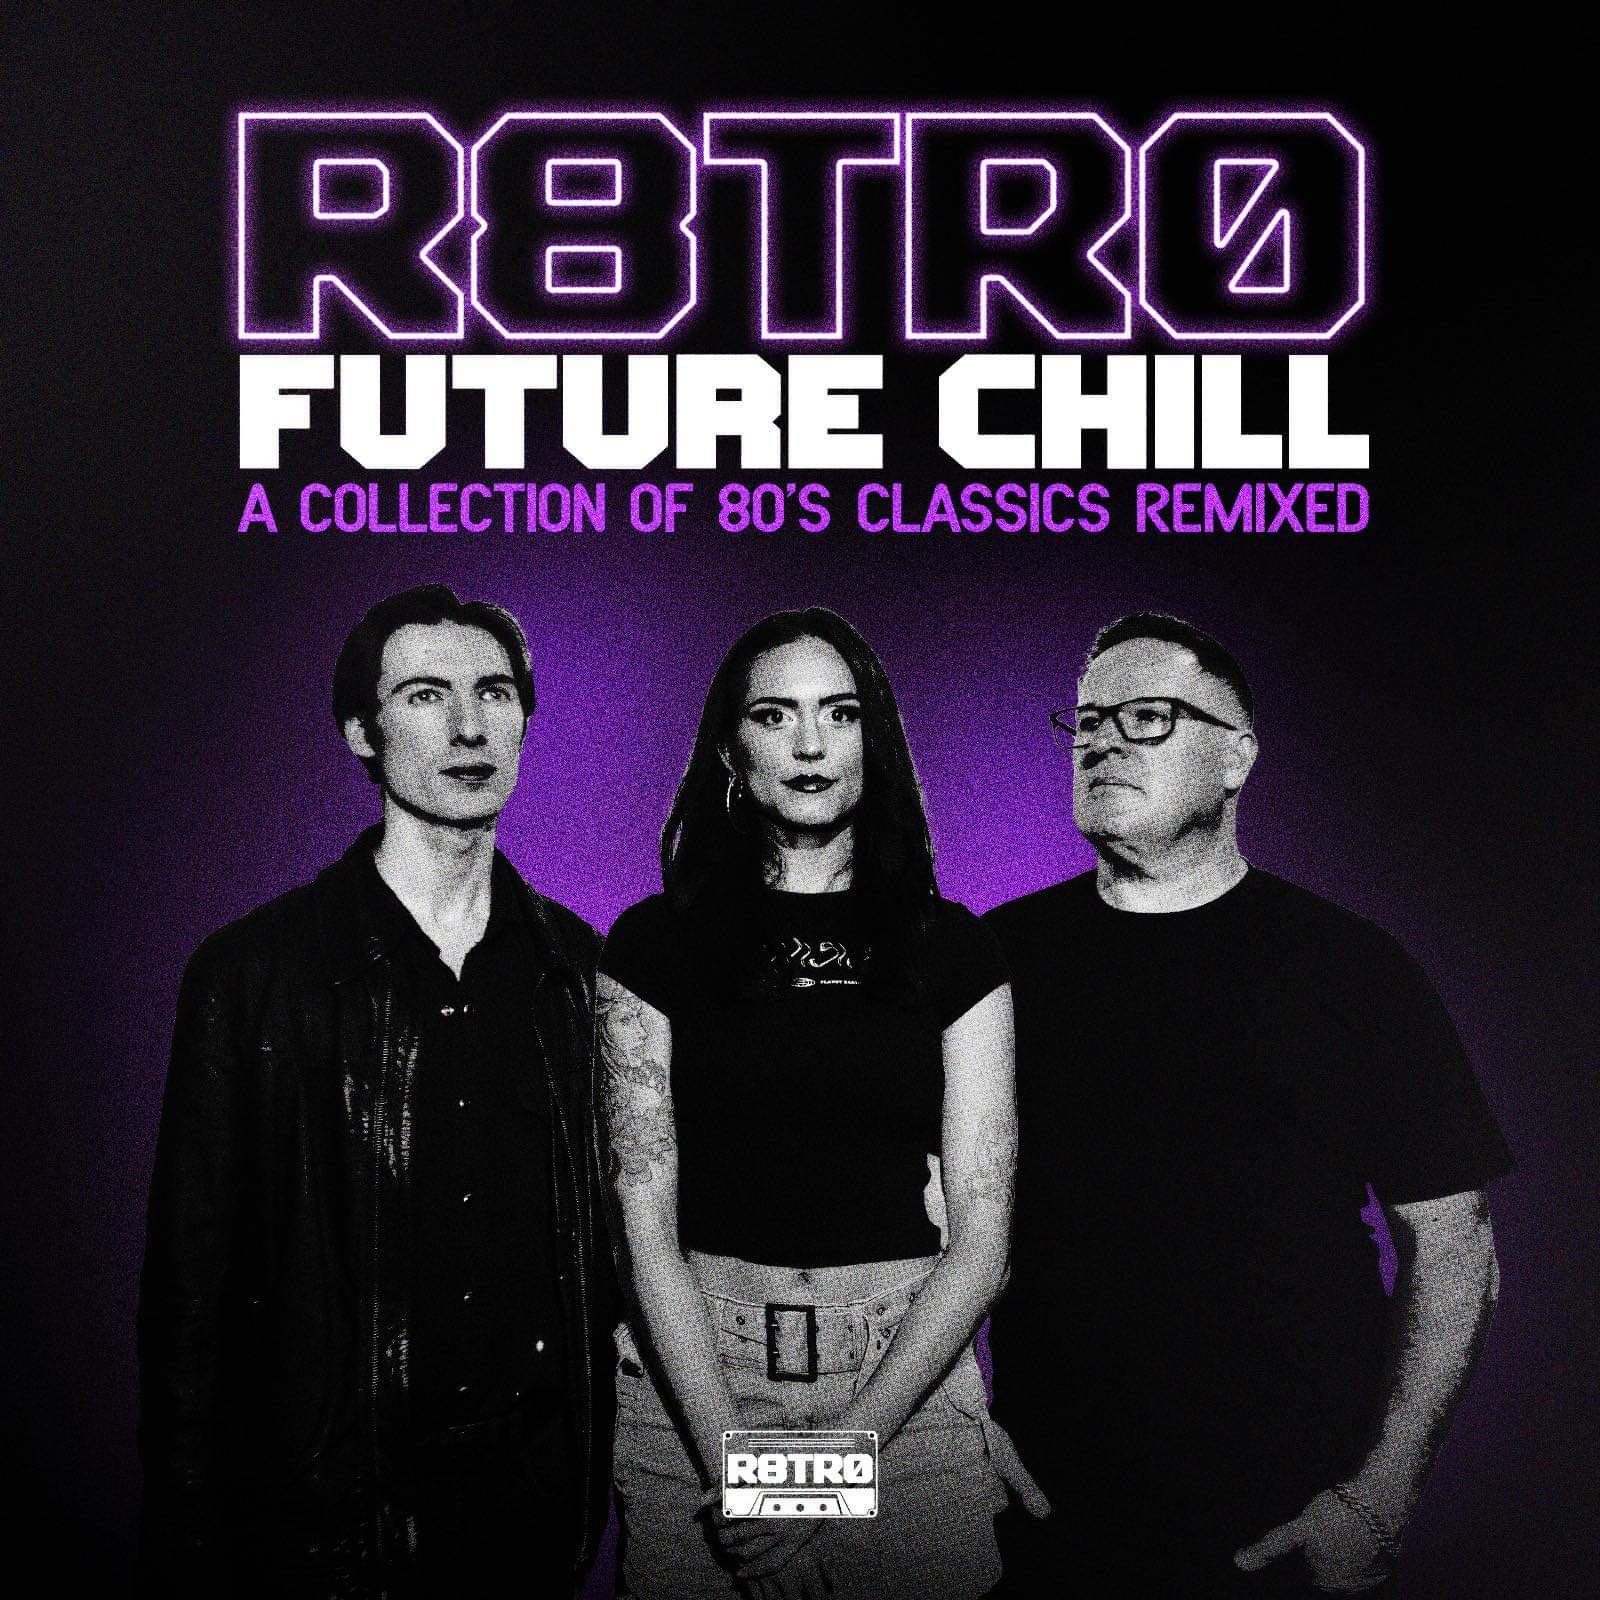 Steve Hill, Technikal, and Rob Tech Put A Soothing Twist on Iconic '80s Hits With 'R8TR0 Future Chill'